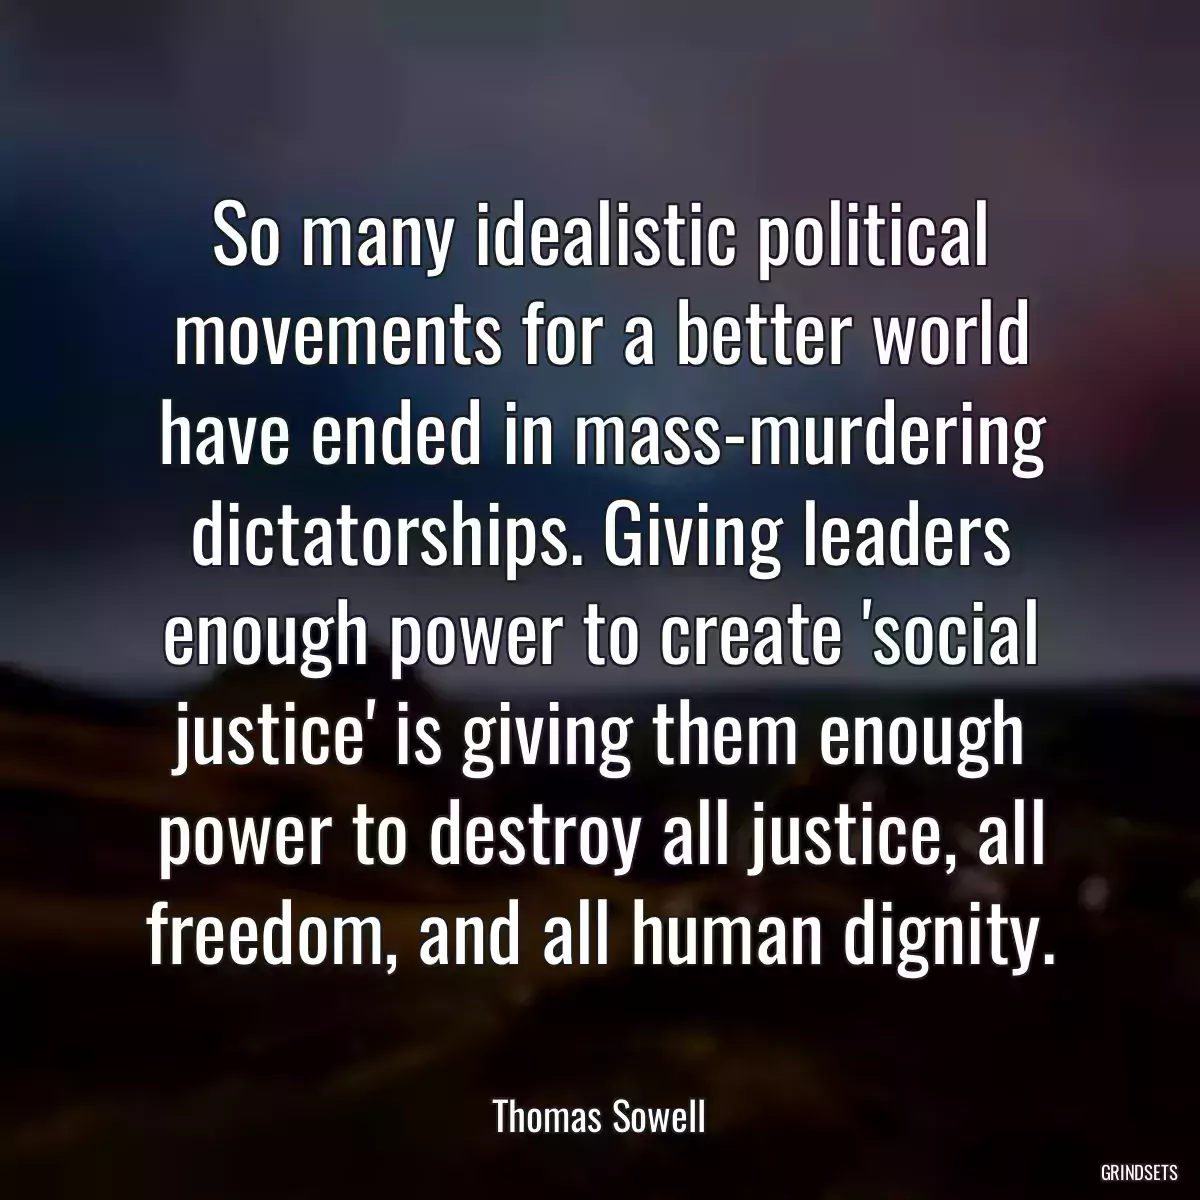 So many idealistic political movements for a better world have ended in mass-murdering dictatorships. Giving leaders enough power to create \'social justice\' is giving them enough power to destroy all justice, all freedom, and all human dignity.